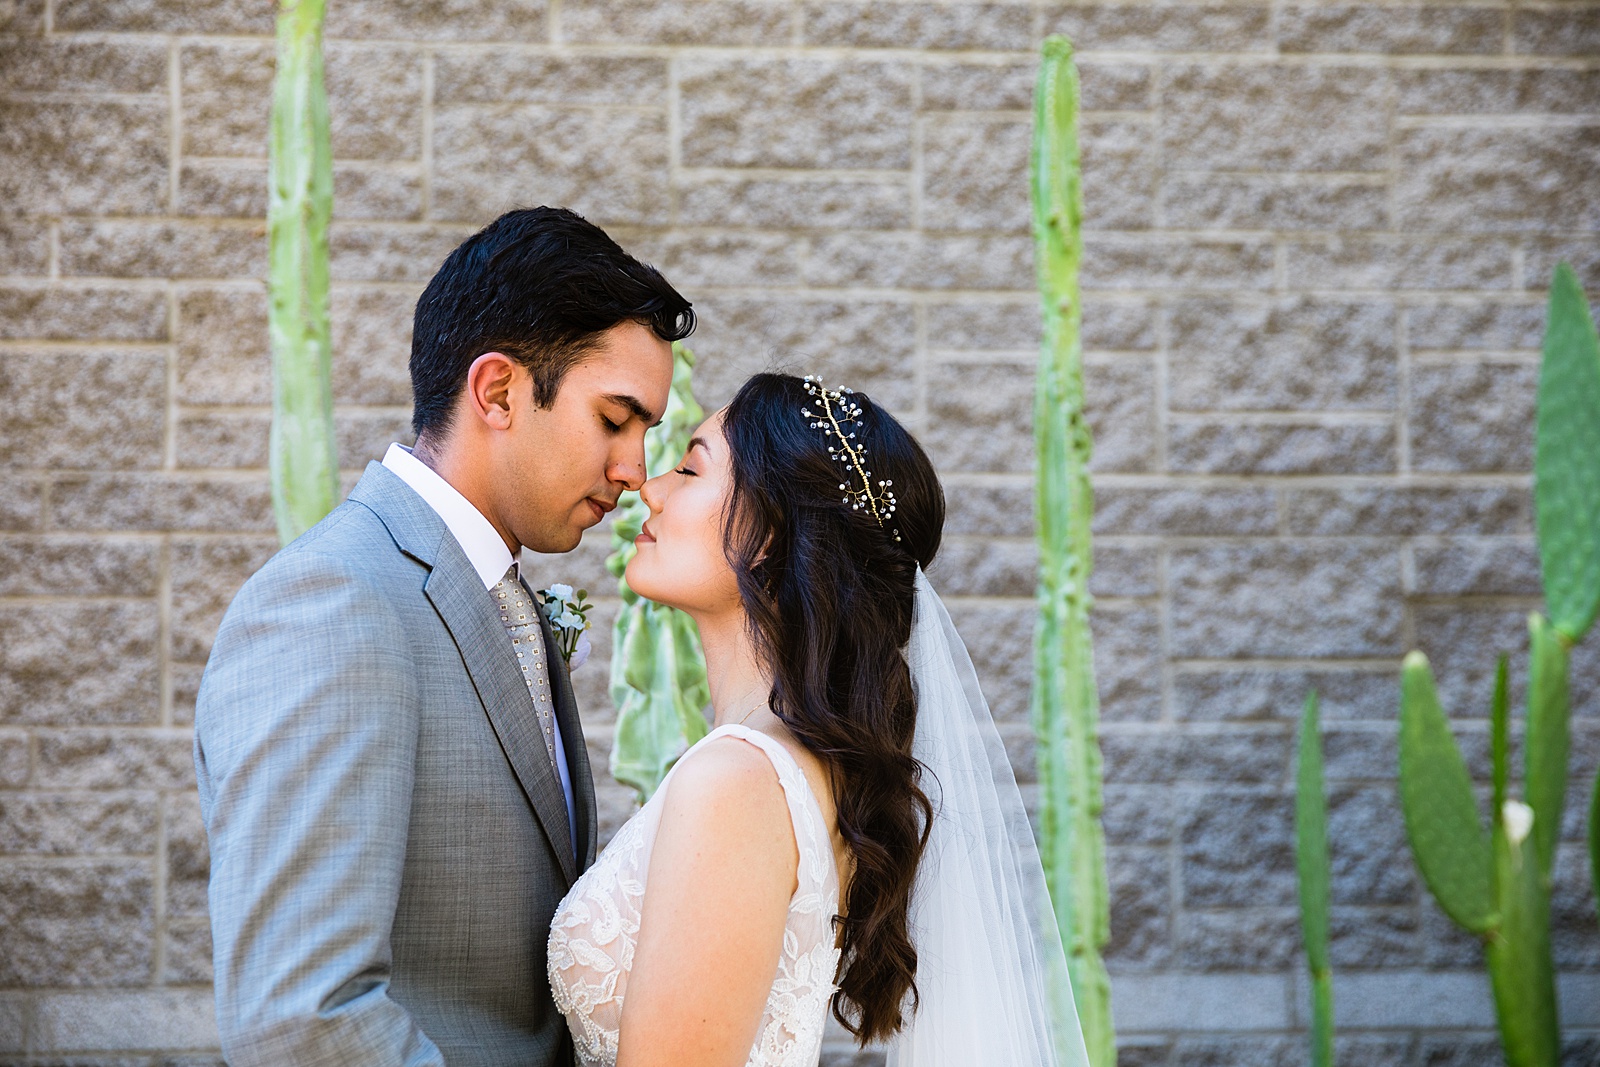 Bride and groom share an intimate moment during their Hyatt Regency Scottsdale Resort & Spa At Gainey Ranch wedding by Scottdsale wedding photographer PMA Photography.